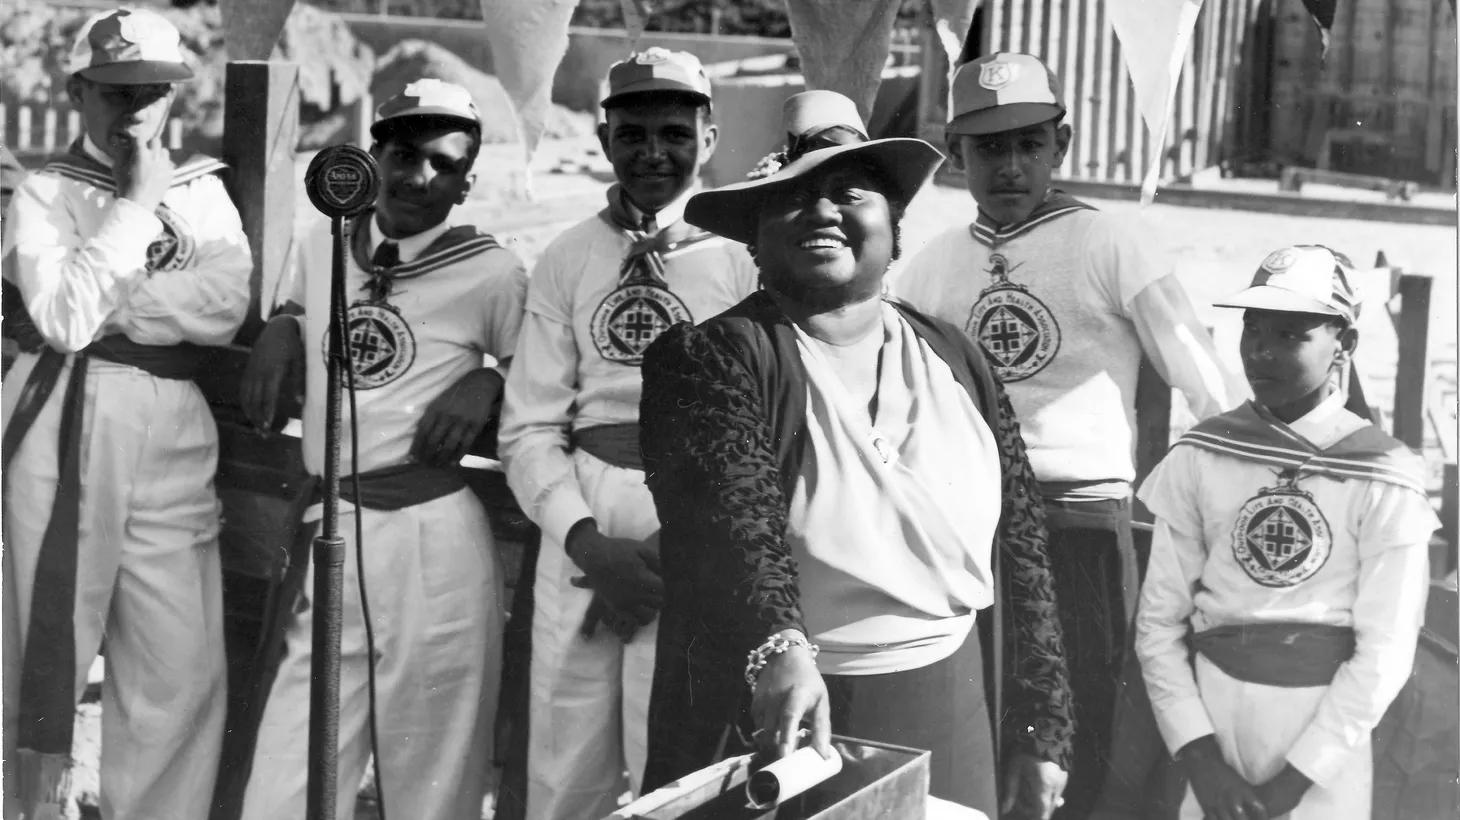 Hattie McDaniel and boys from the Los Angeles Health Club attend the Val Verde Park swimming pool cornerstone installation ceremony, April 16, 1939.